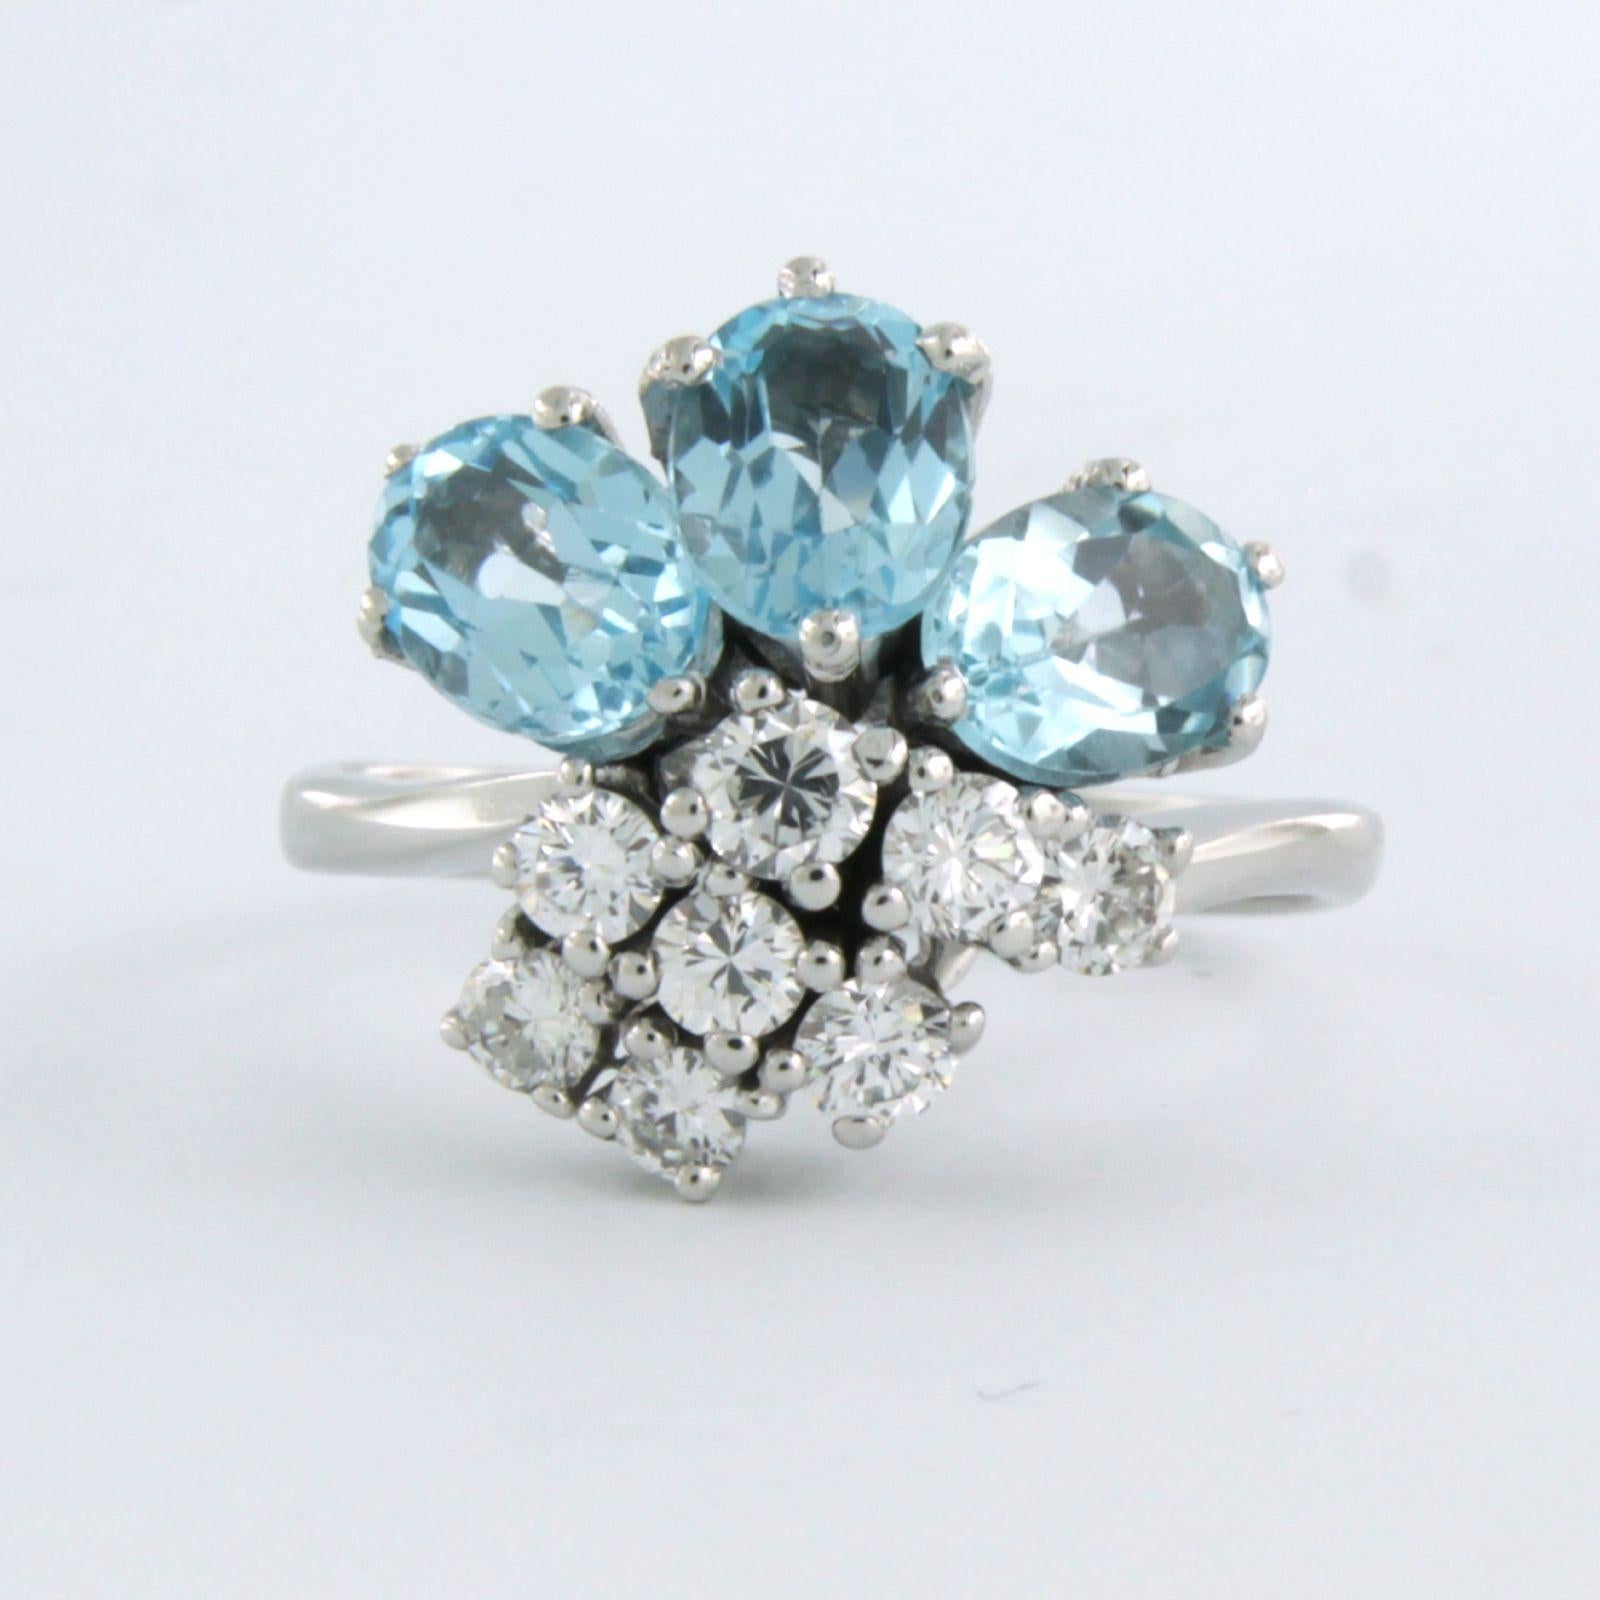 14k gold ring with blue topaz. 2.40ct and brilliant cut diamond up to. 0.40ct - F/G - VS/SI - ring size U.S. 7.25 - EU. 17.5(55)

detailed description:

the top of the ring is 1.6 cm wide by 8.3 mm high

weight 5.3 grams

ring size U.S. 7.25 - EU.